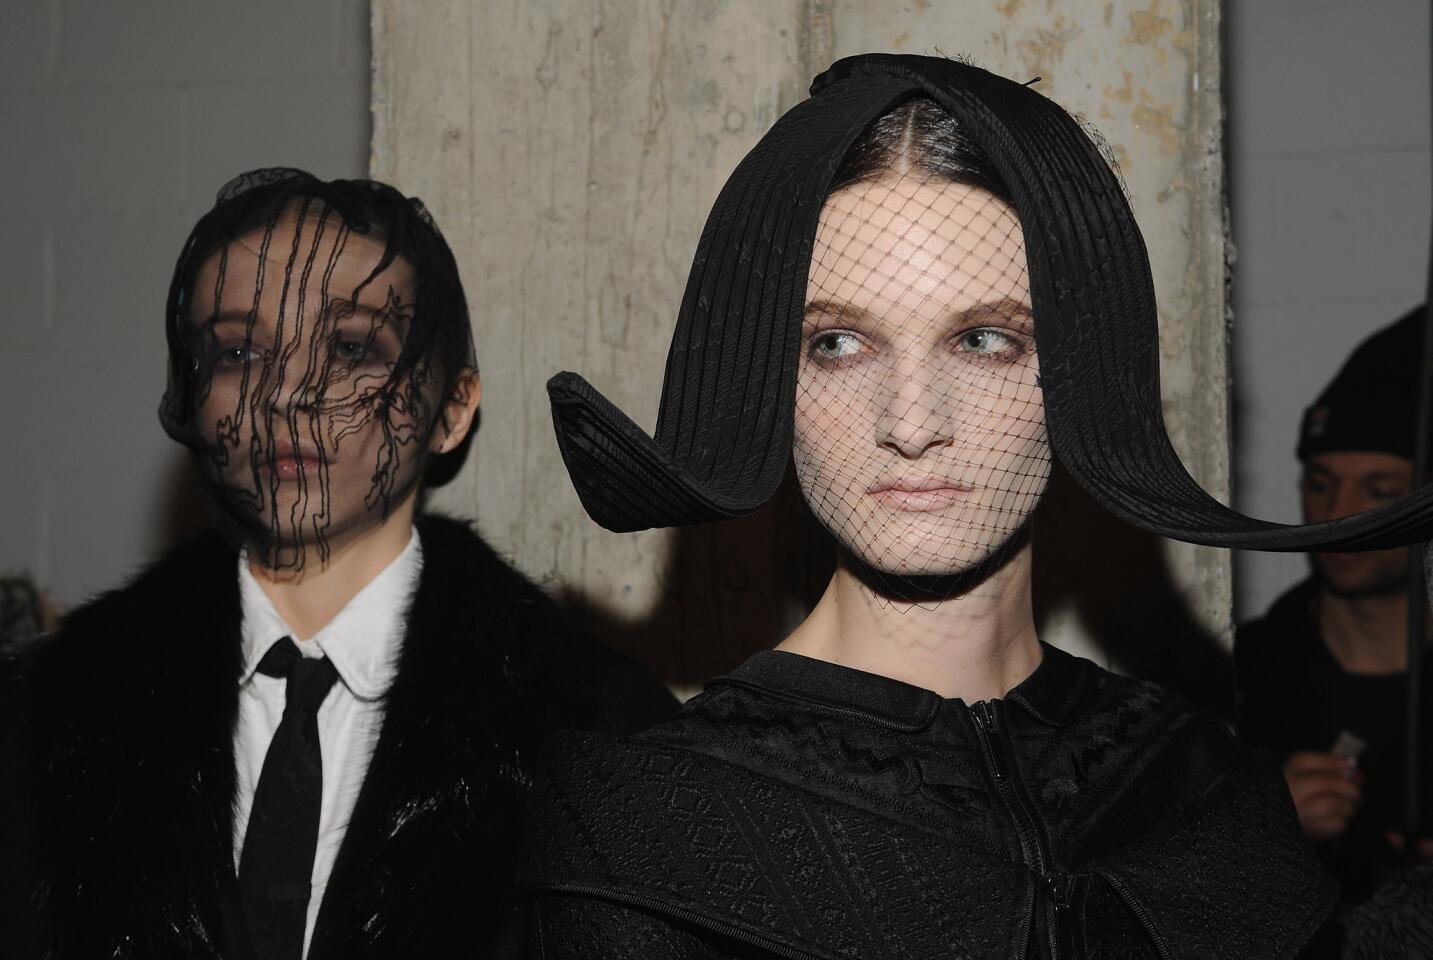 Models are shown backstage before the Thom Browne women's fashion show at Skylight Modern during Mercedes-Benz Fashion Week on Monday. Complete updates from New York Fashion Week 2015 | Celebrities at New York Fashion Week | York Fashion Week: Street Style